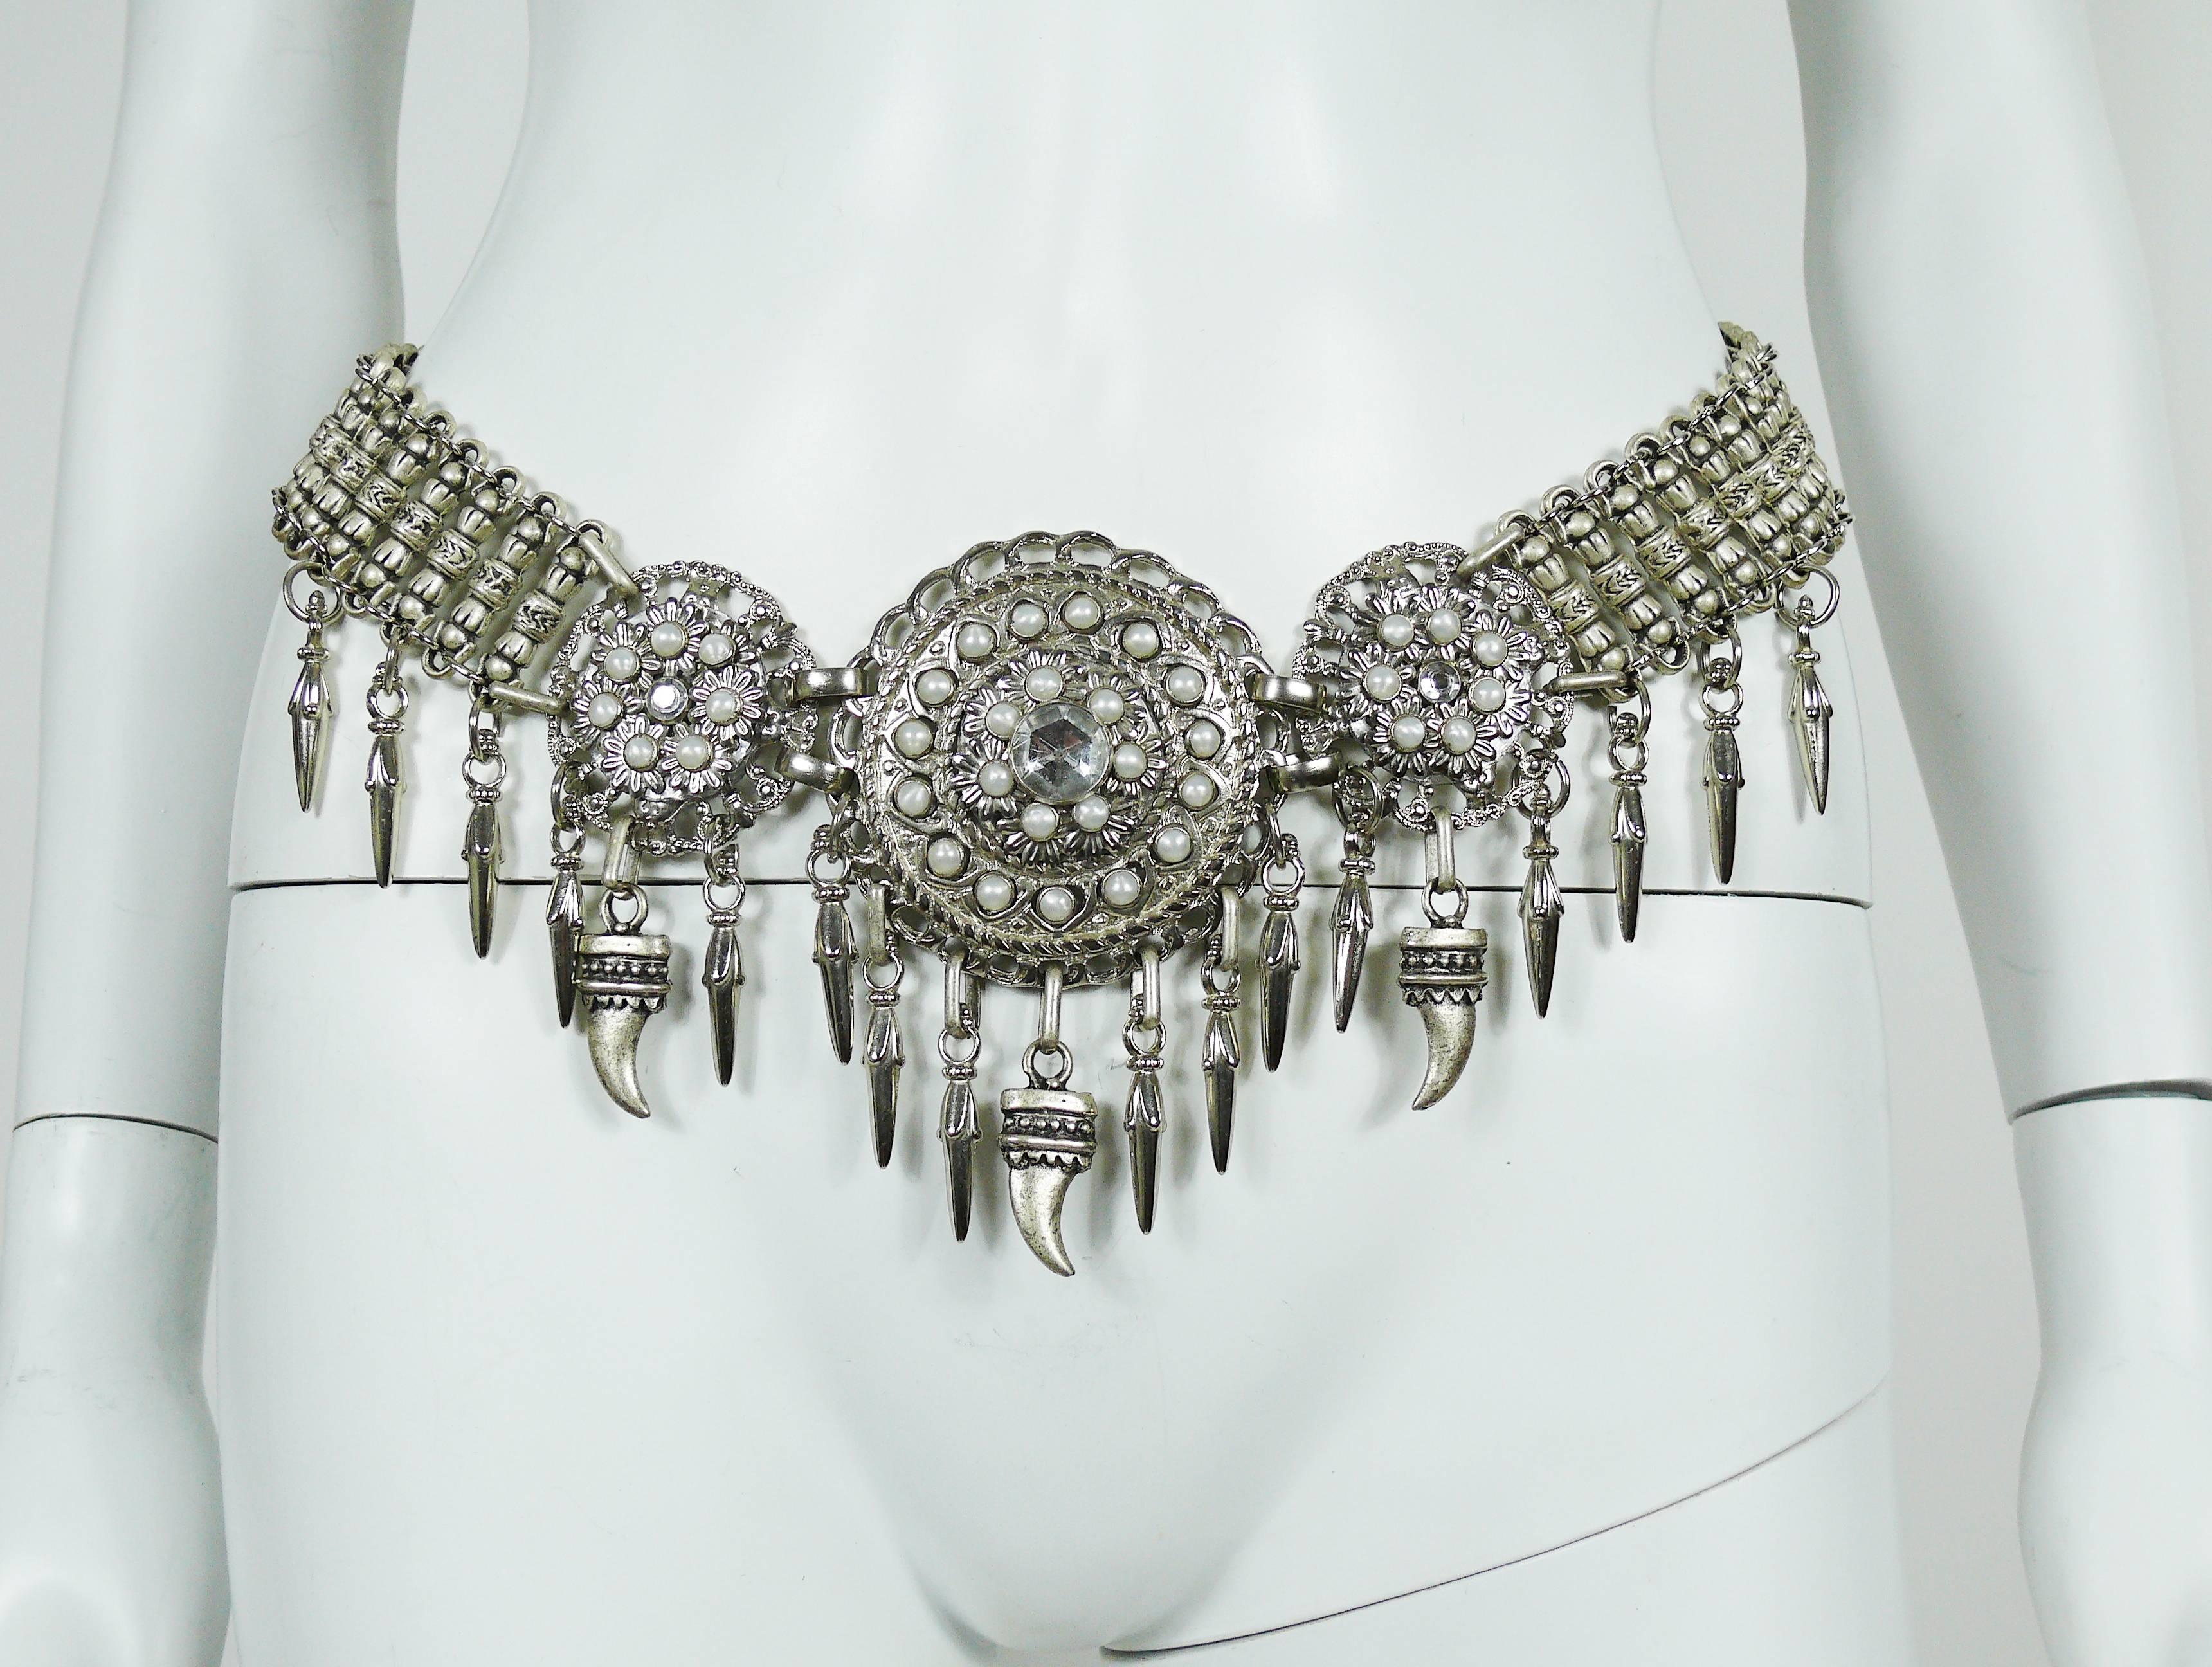 JOSE COTEL vintage rare ethnic inspired silver tone chain belt featuring three openwork medallions embellished with faux pearls, resin crystals and claw charms.

Hook closure.
Adjustable size.

May be worn as a necklace.

As some weight on it